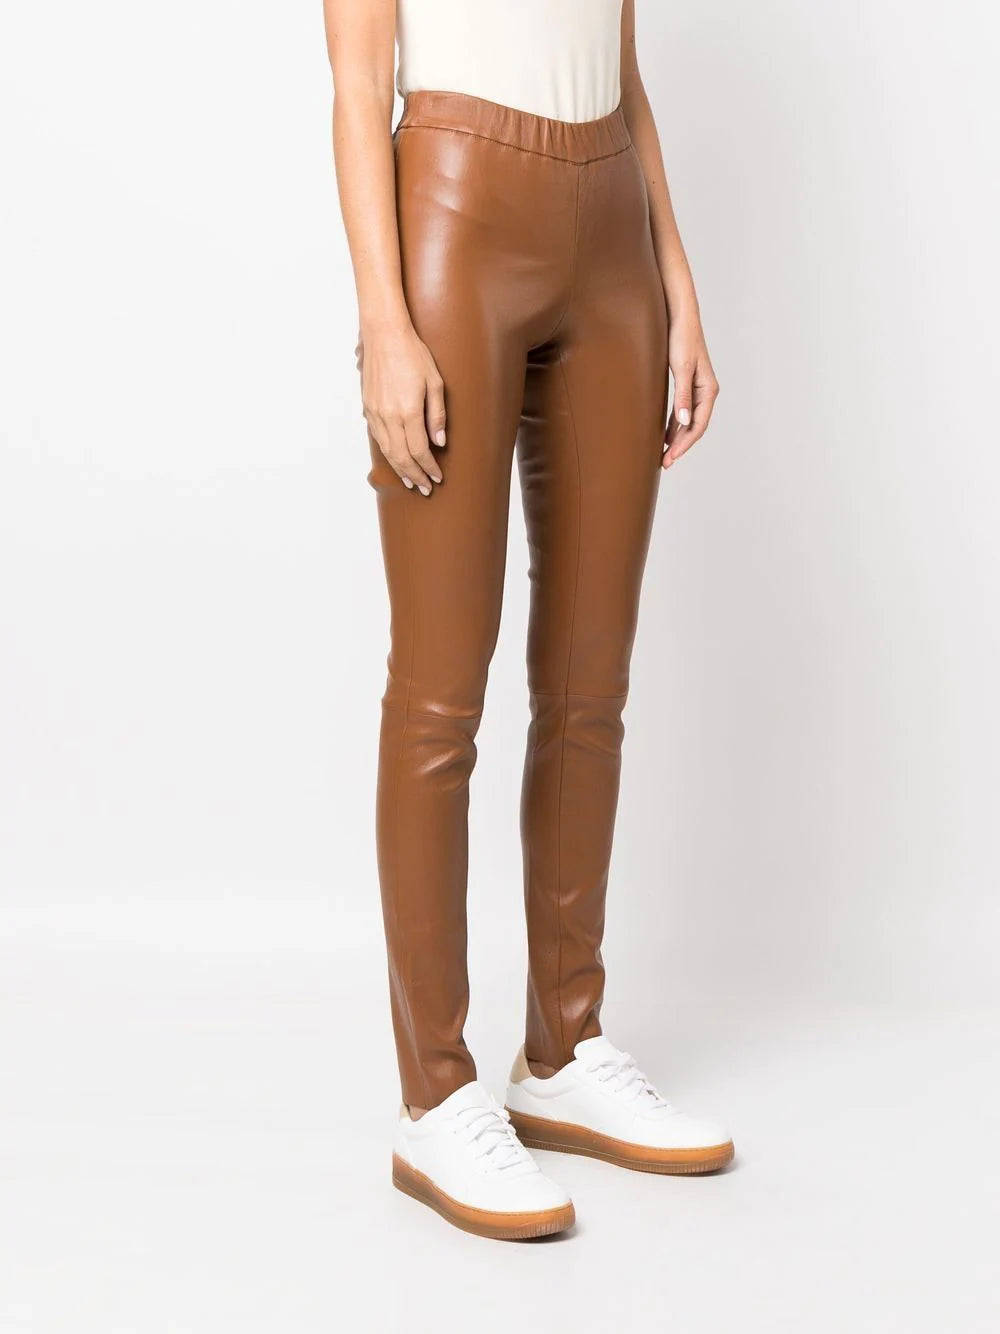 Pull on Leather Legging In Cognac